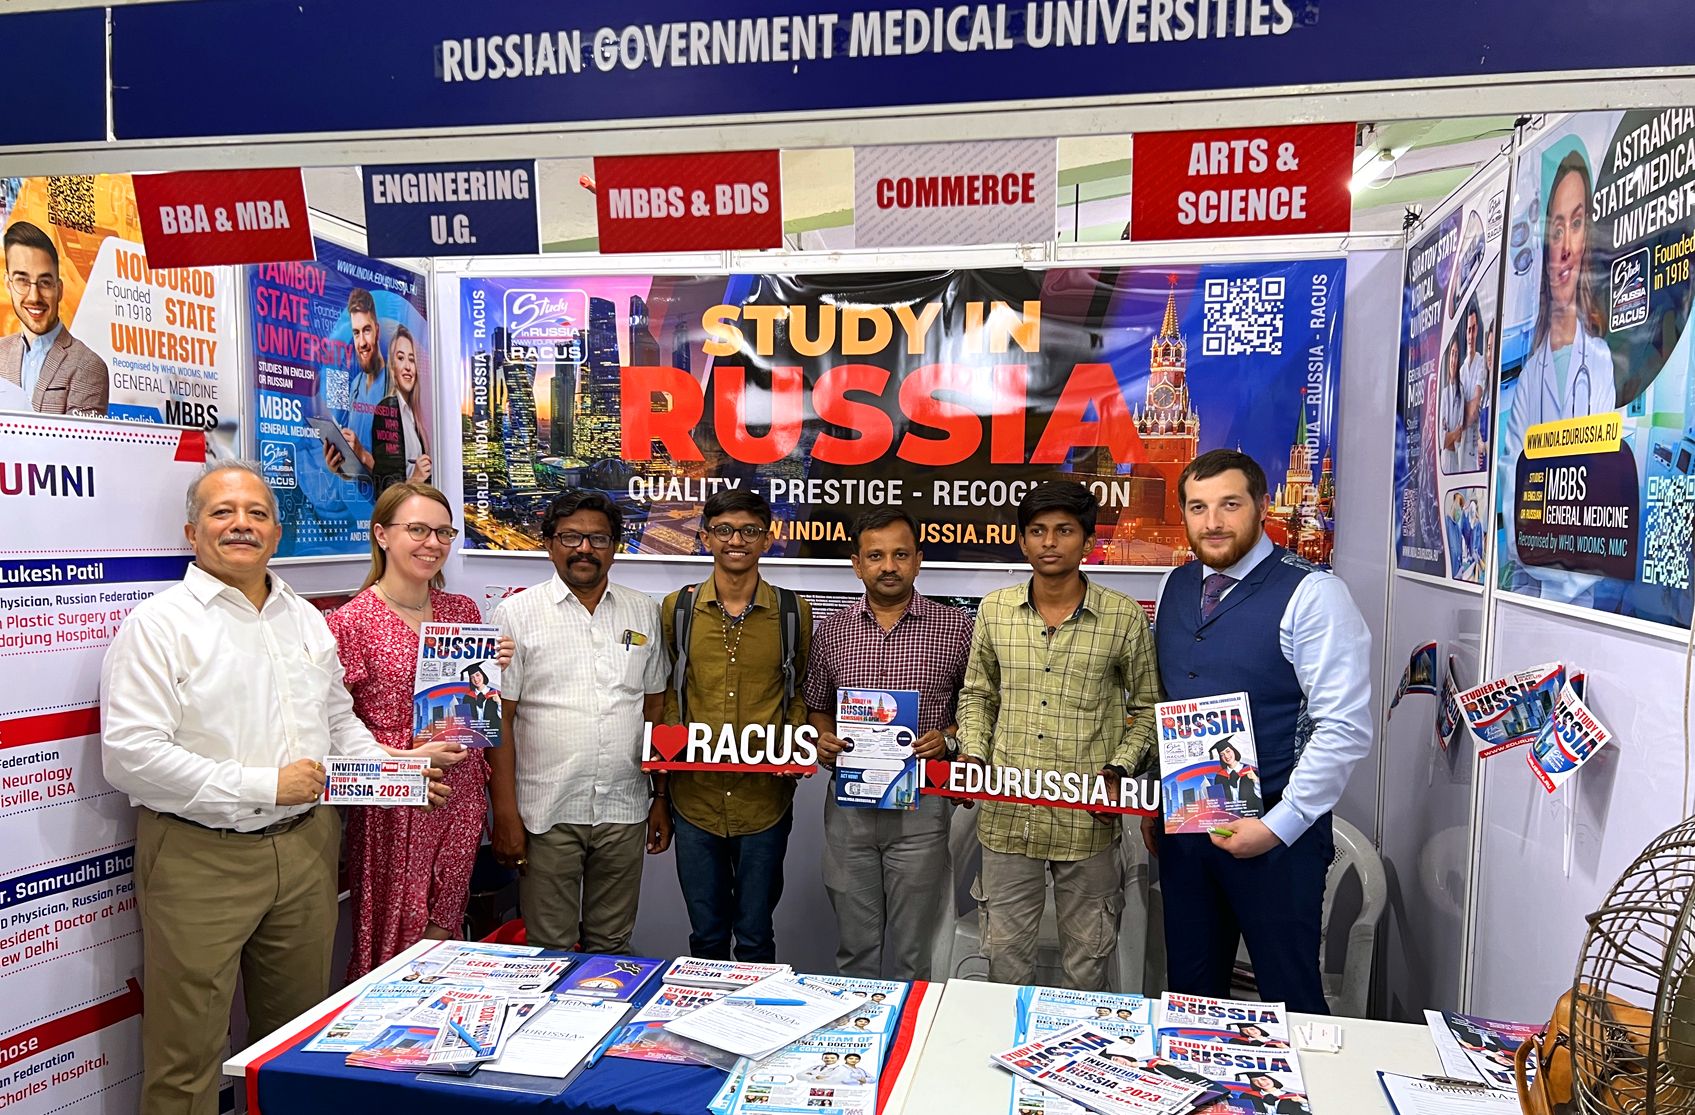 The delegation of the group of Russian state universities RACUS arrived in Pune, the cultural capital of India, with an important mission. From June 9 to 11, 2023, state hall "Ganesh Kala Krida Manch" hosted a large-scale international education exhibition "Sakal Vidya Expo 2023". Russian higher education was successfully presented there by RACUS organization. It is no coincidence that Pune is called the "Oxford of the East" as it ranks first in the list of Indian cities by the number of students; it is also full of universities and other educational institutions. Therefore, this international exhibition in Pune attracted a record number of ambitious Indian youth — according to the hosts, the number of visitors reached 15,000.